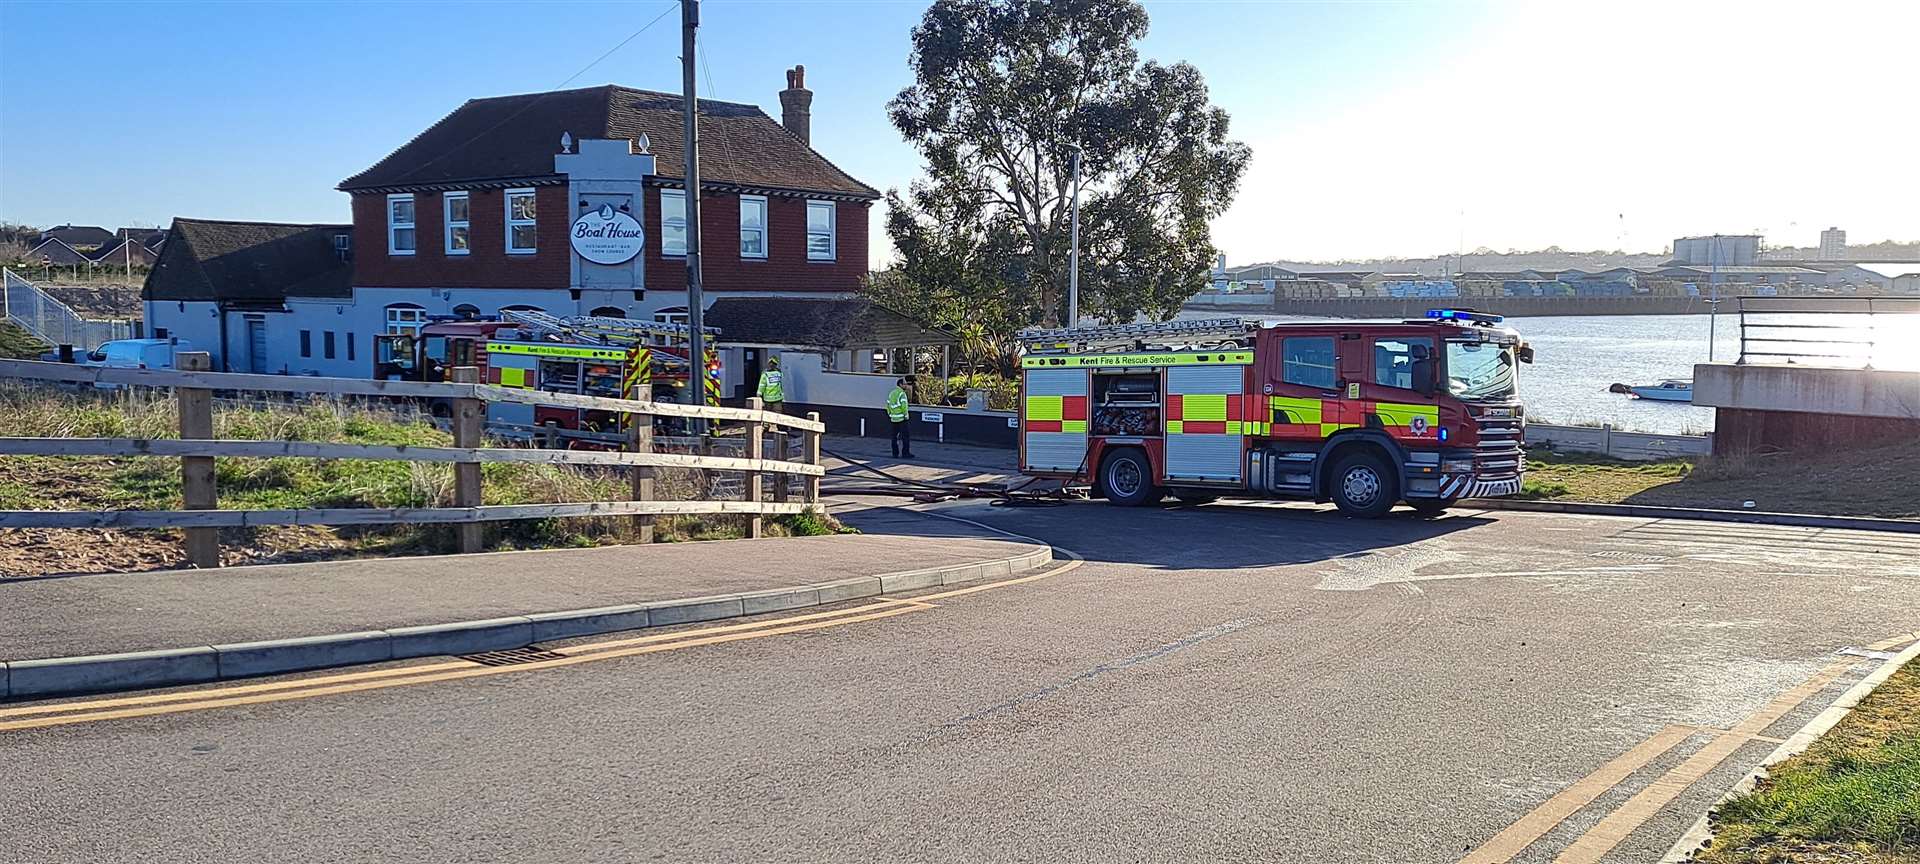 Fire engines outside Boat House in Strood